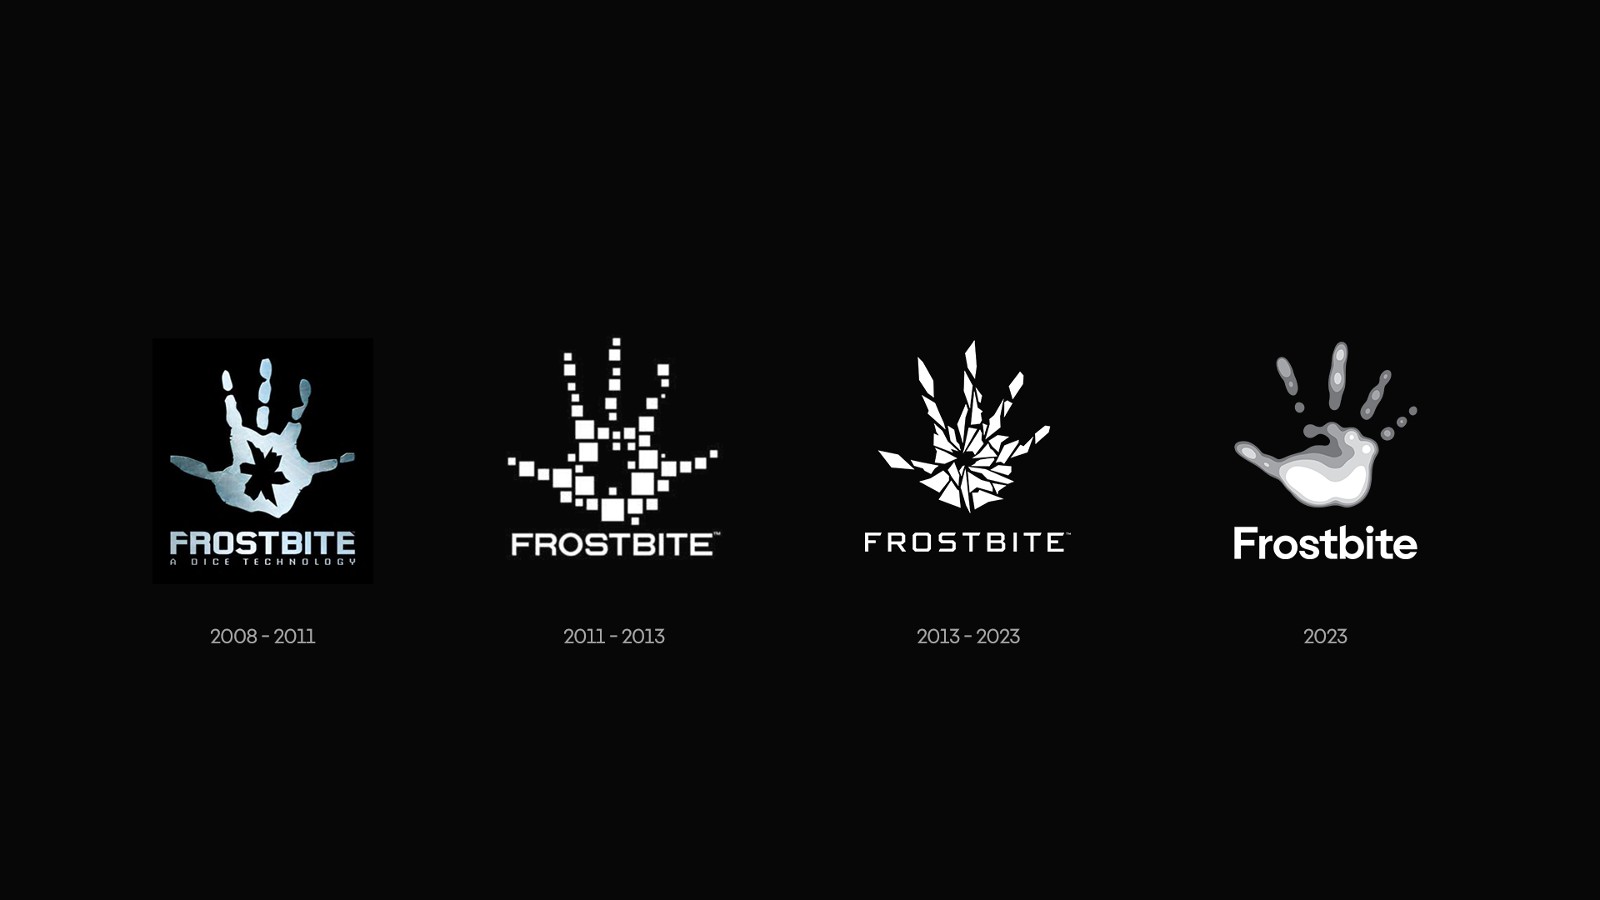 ea-news-frostbite-rebrand-article-frostbite-logo-history.png.adapt.1920w